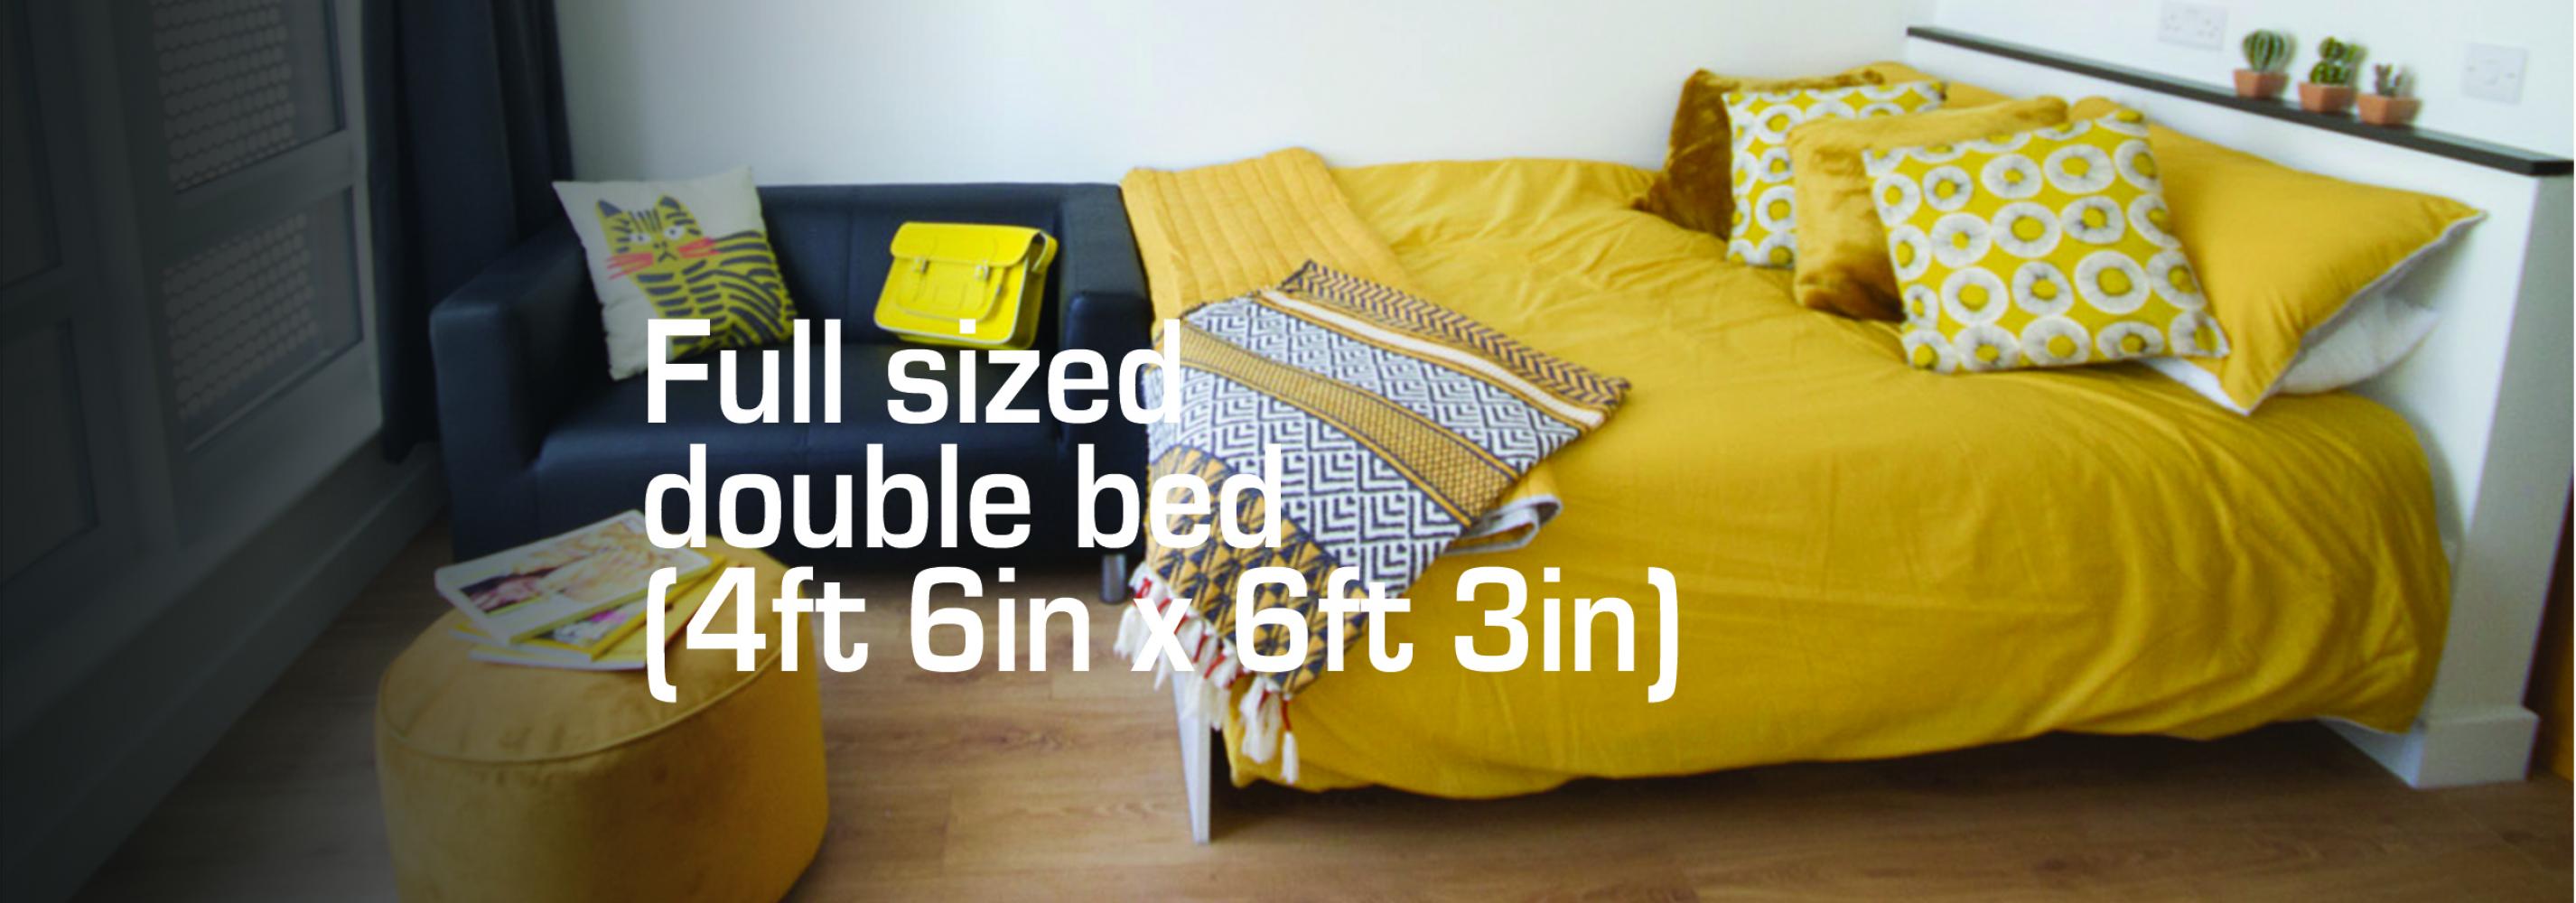 Full sized double bed (4ft 6in x 6ft 3in)